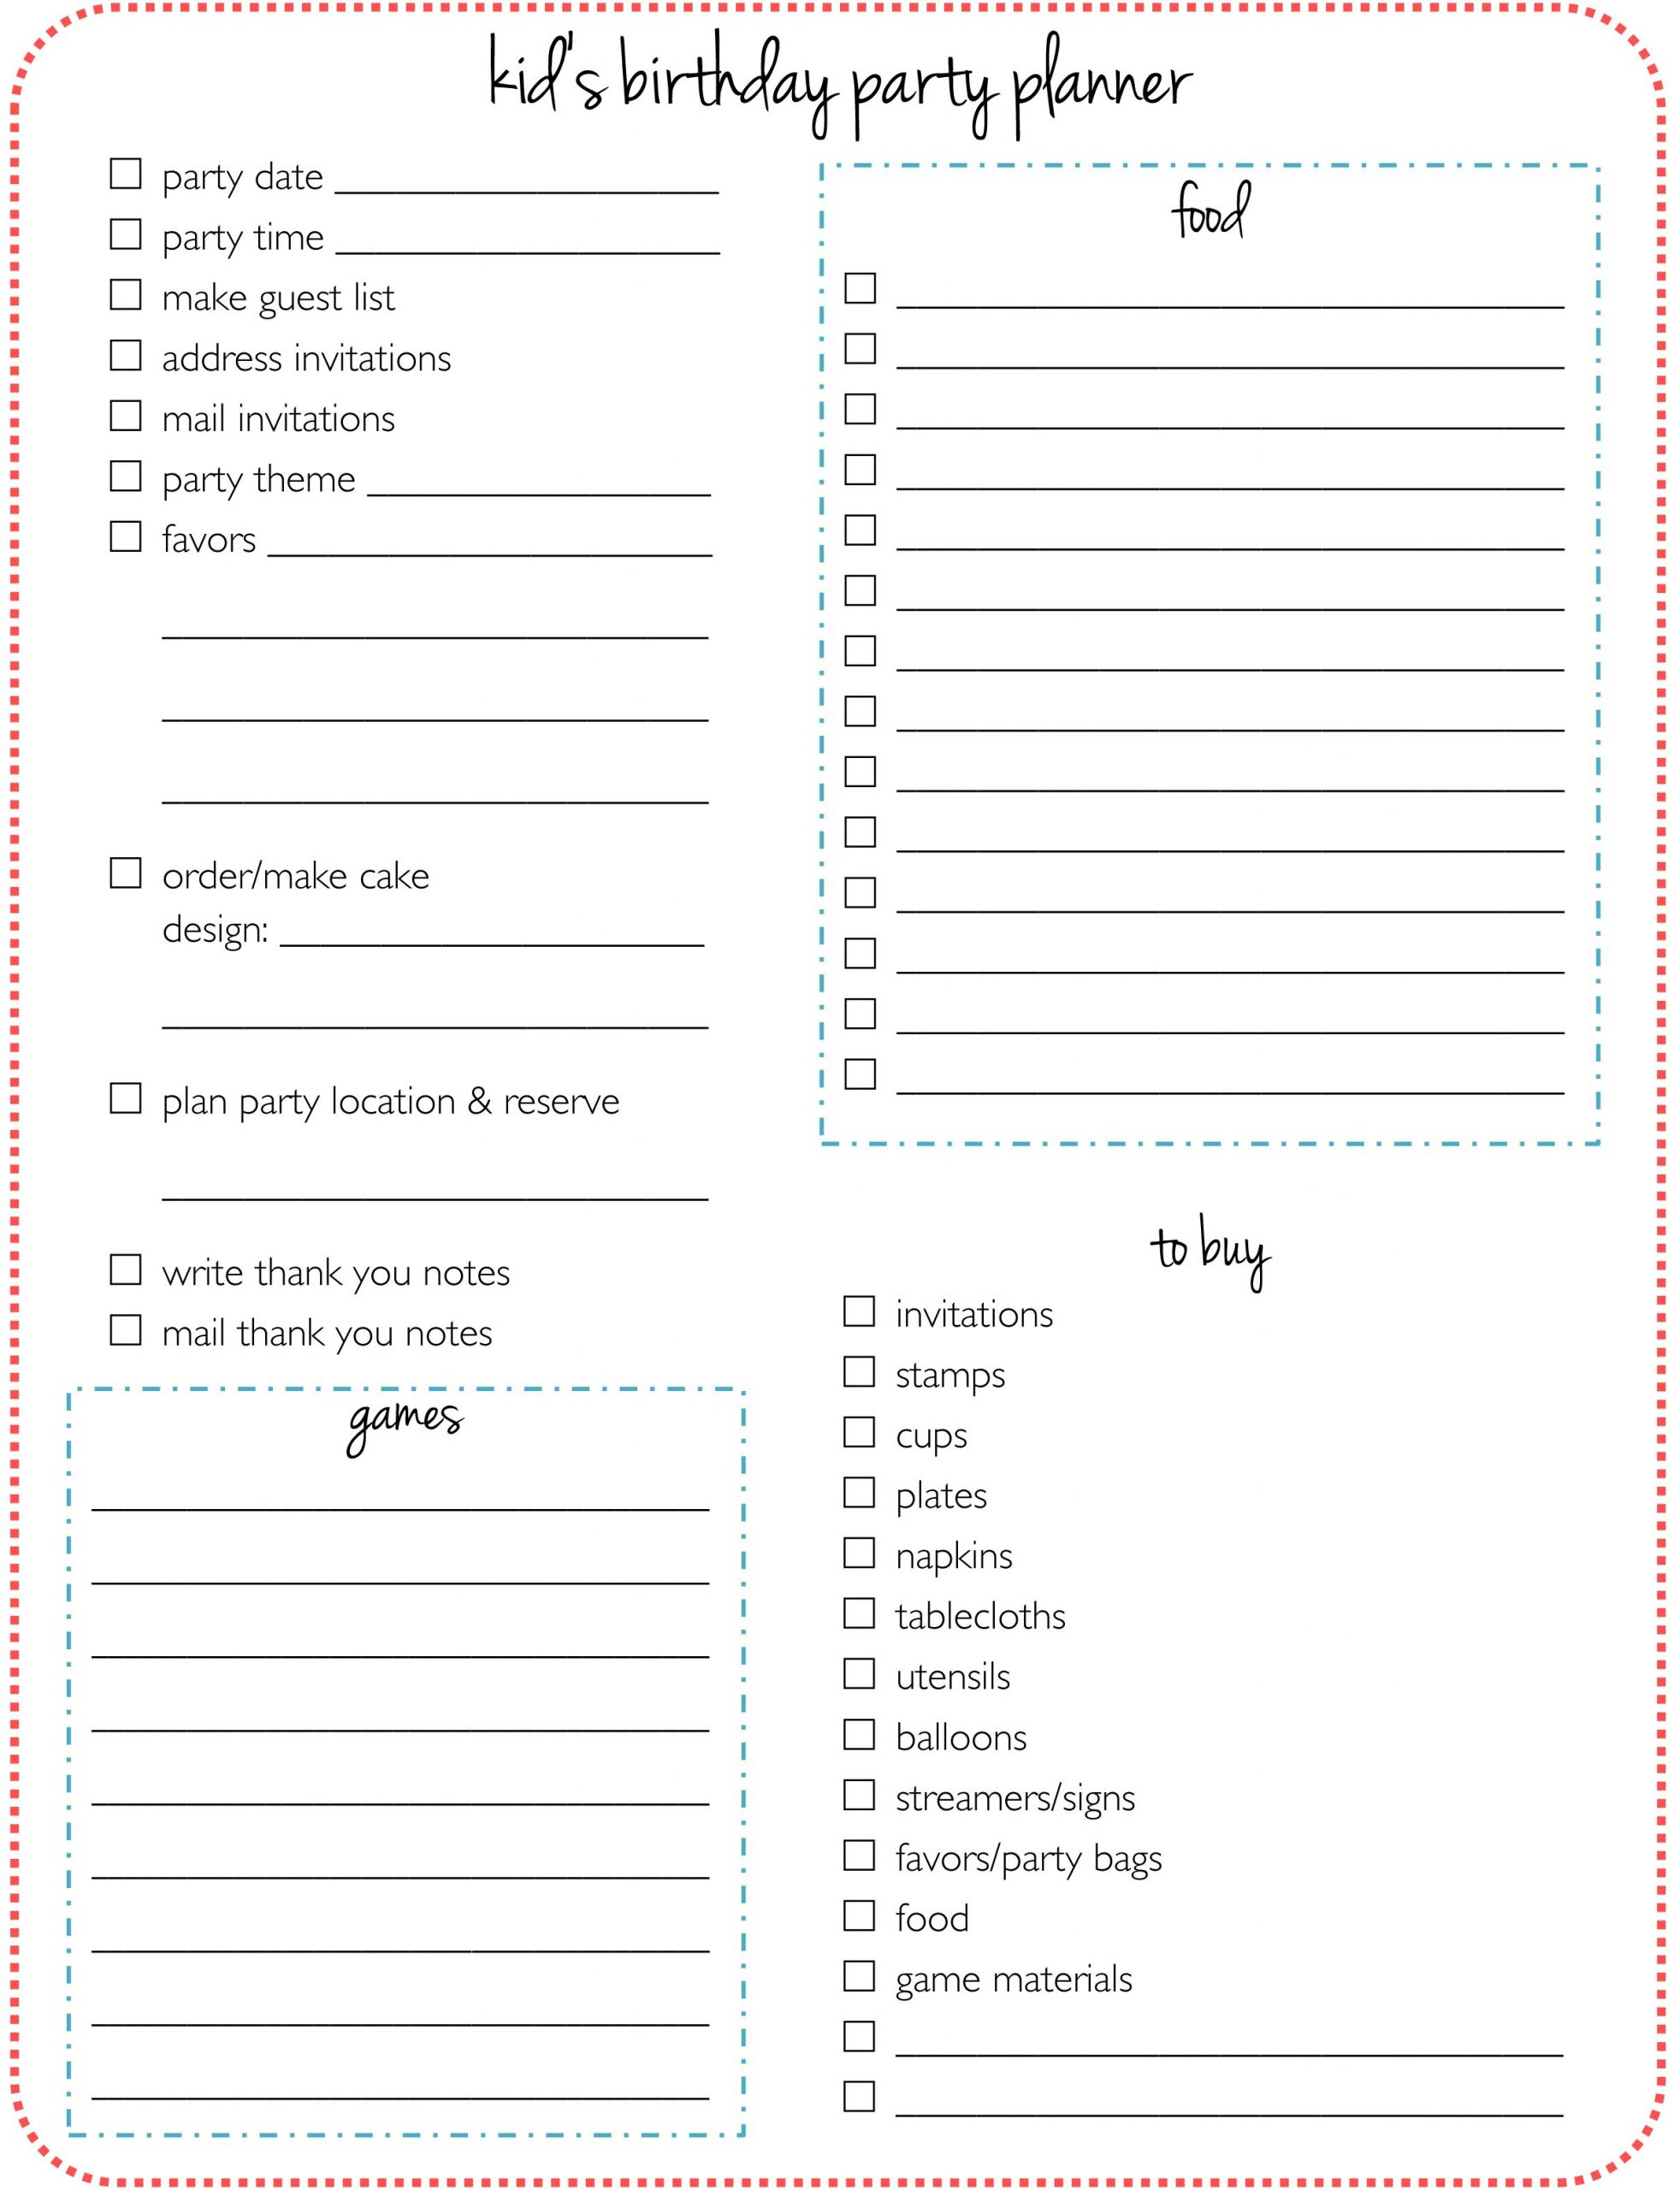 Birthday Party Event Planner Template Throughout Party Planner Checklist Template Throughout Party Planner Checklist Template